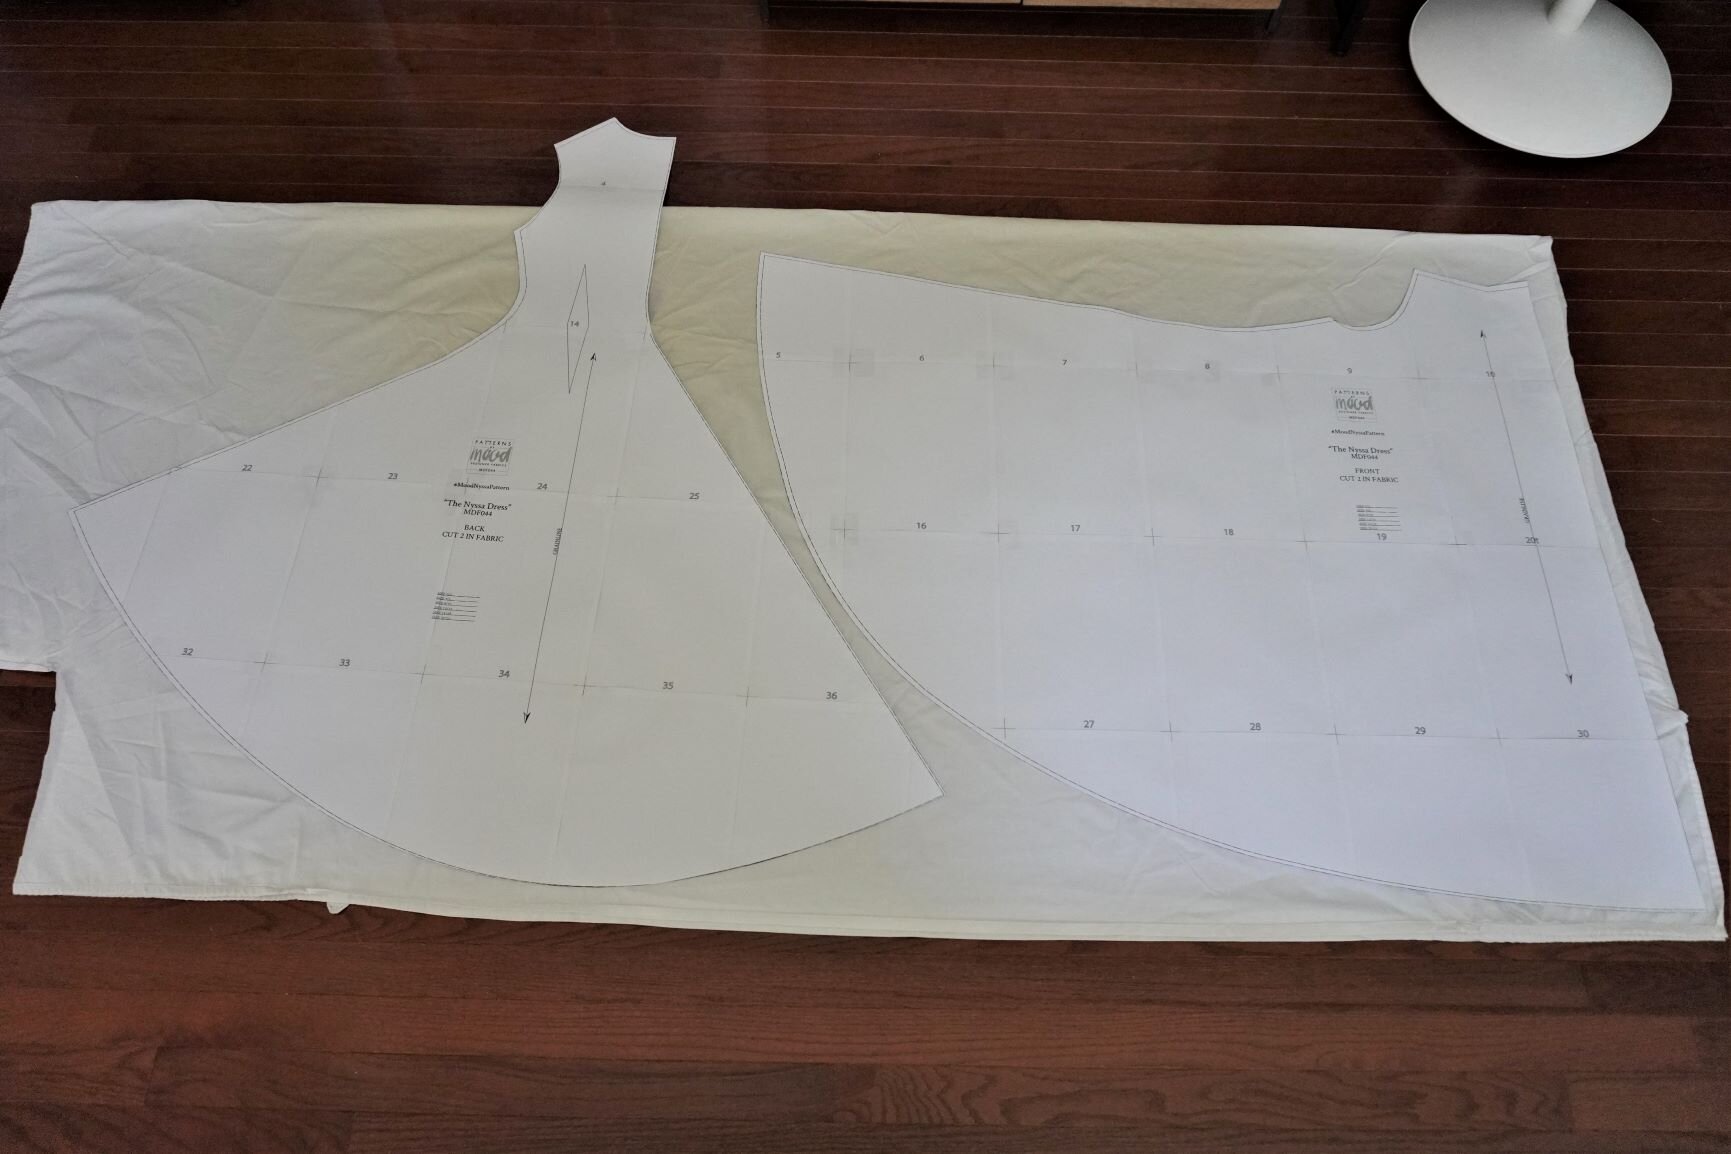 I could not get the front piece to fit on my queen-sized fitted sheet, so I cut the bodice section separately using the leftover fabric in the upper left-hand corner of the sheet.